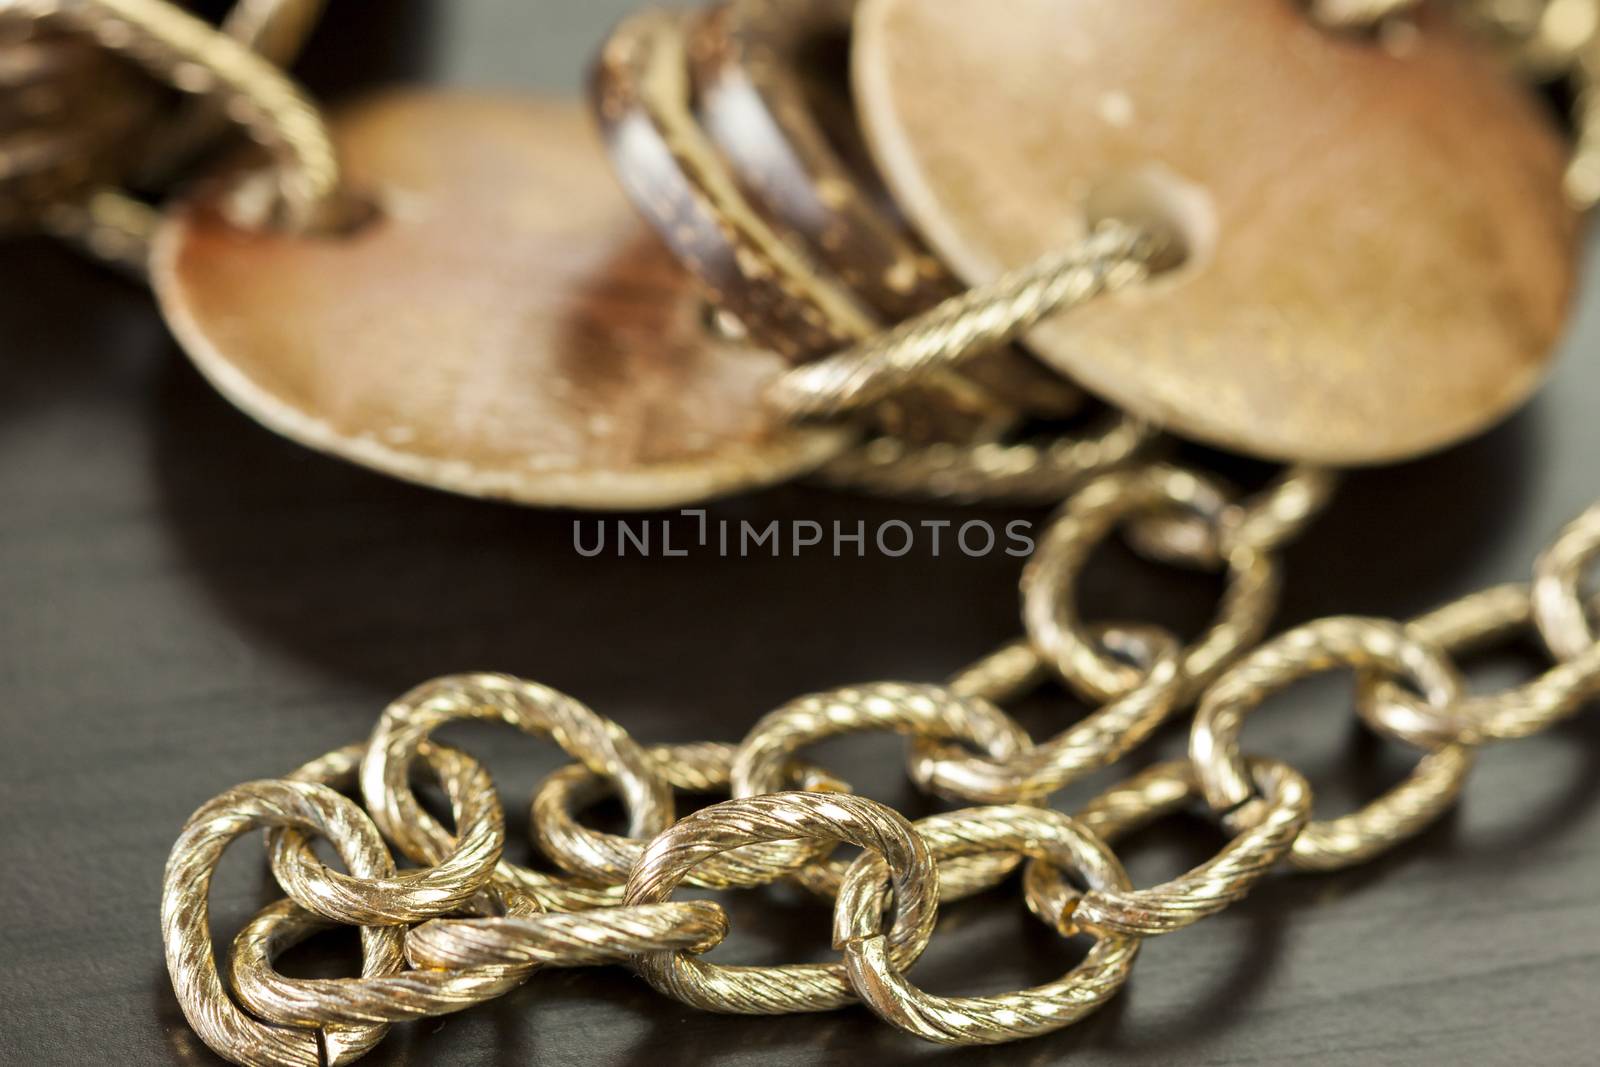 Scratched and tarnished old silver jewellery with two flat discs flanking a ring suspended on an oval link chain, close up view on a grey background